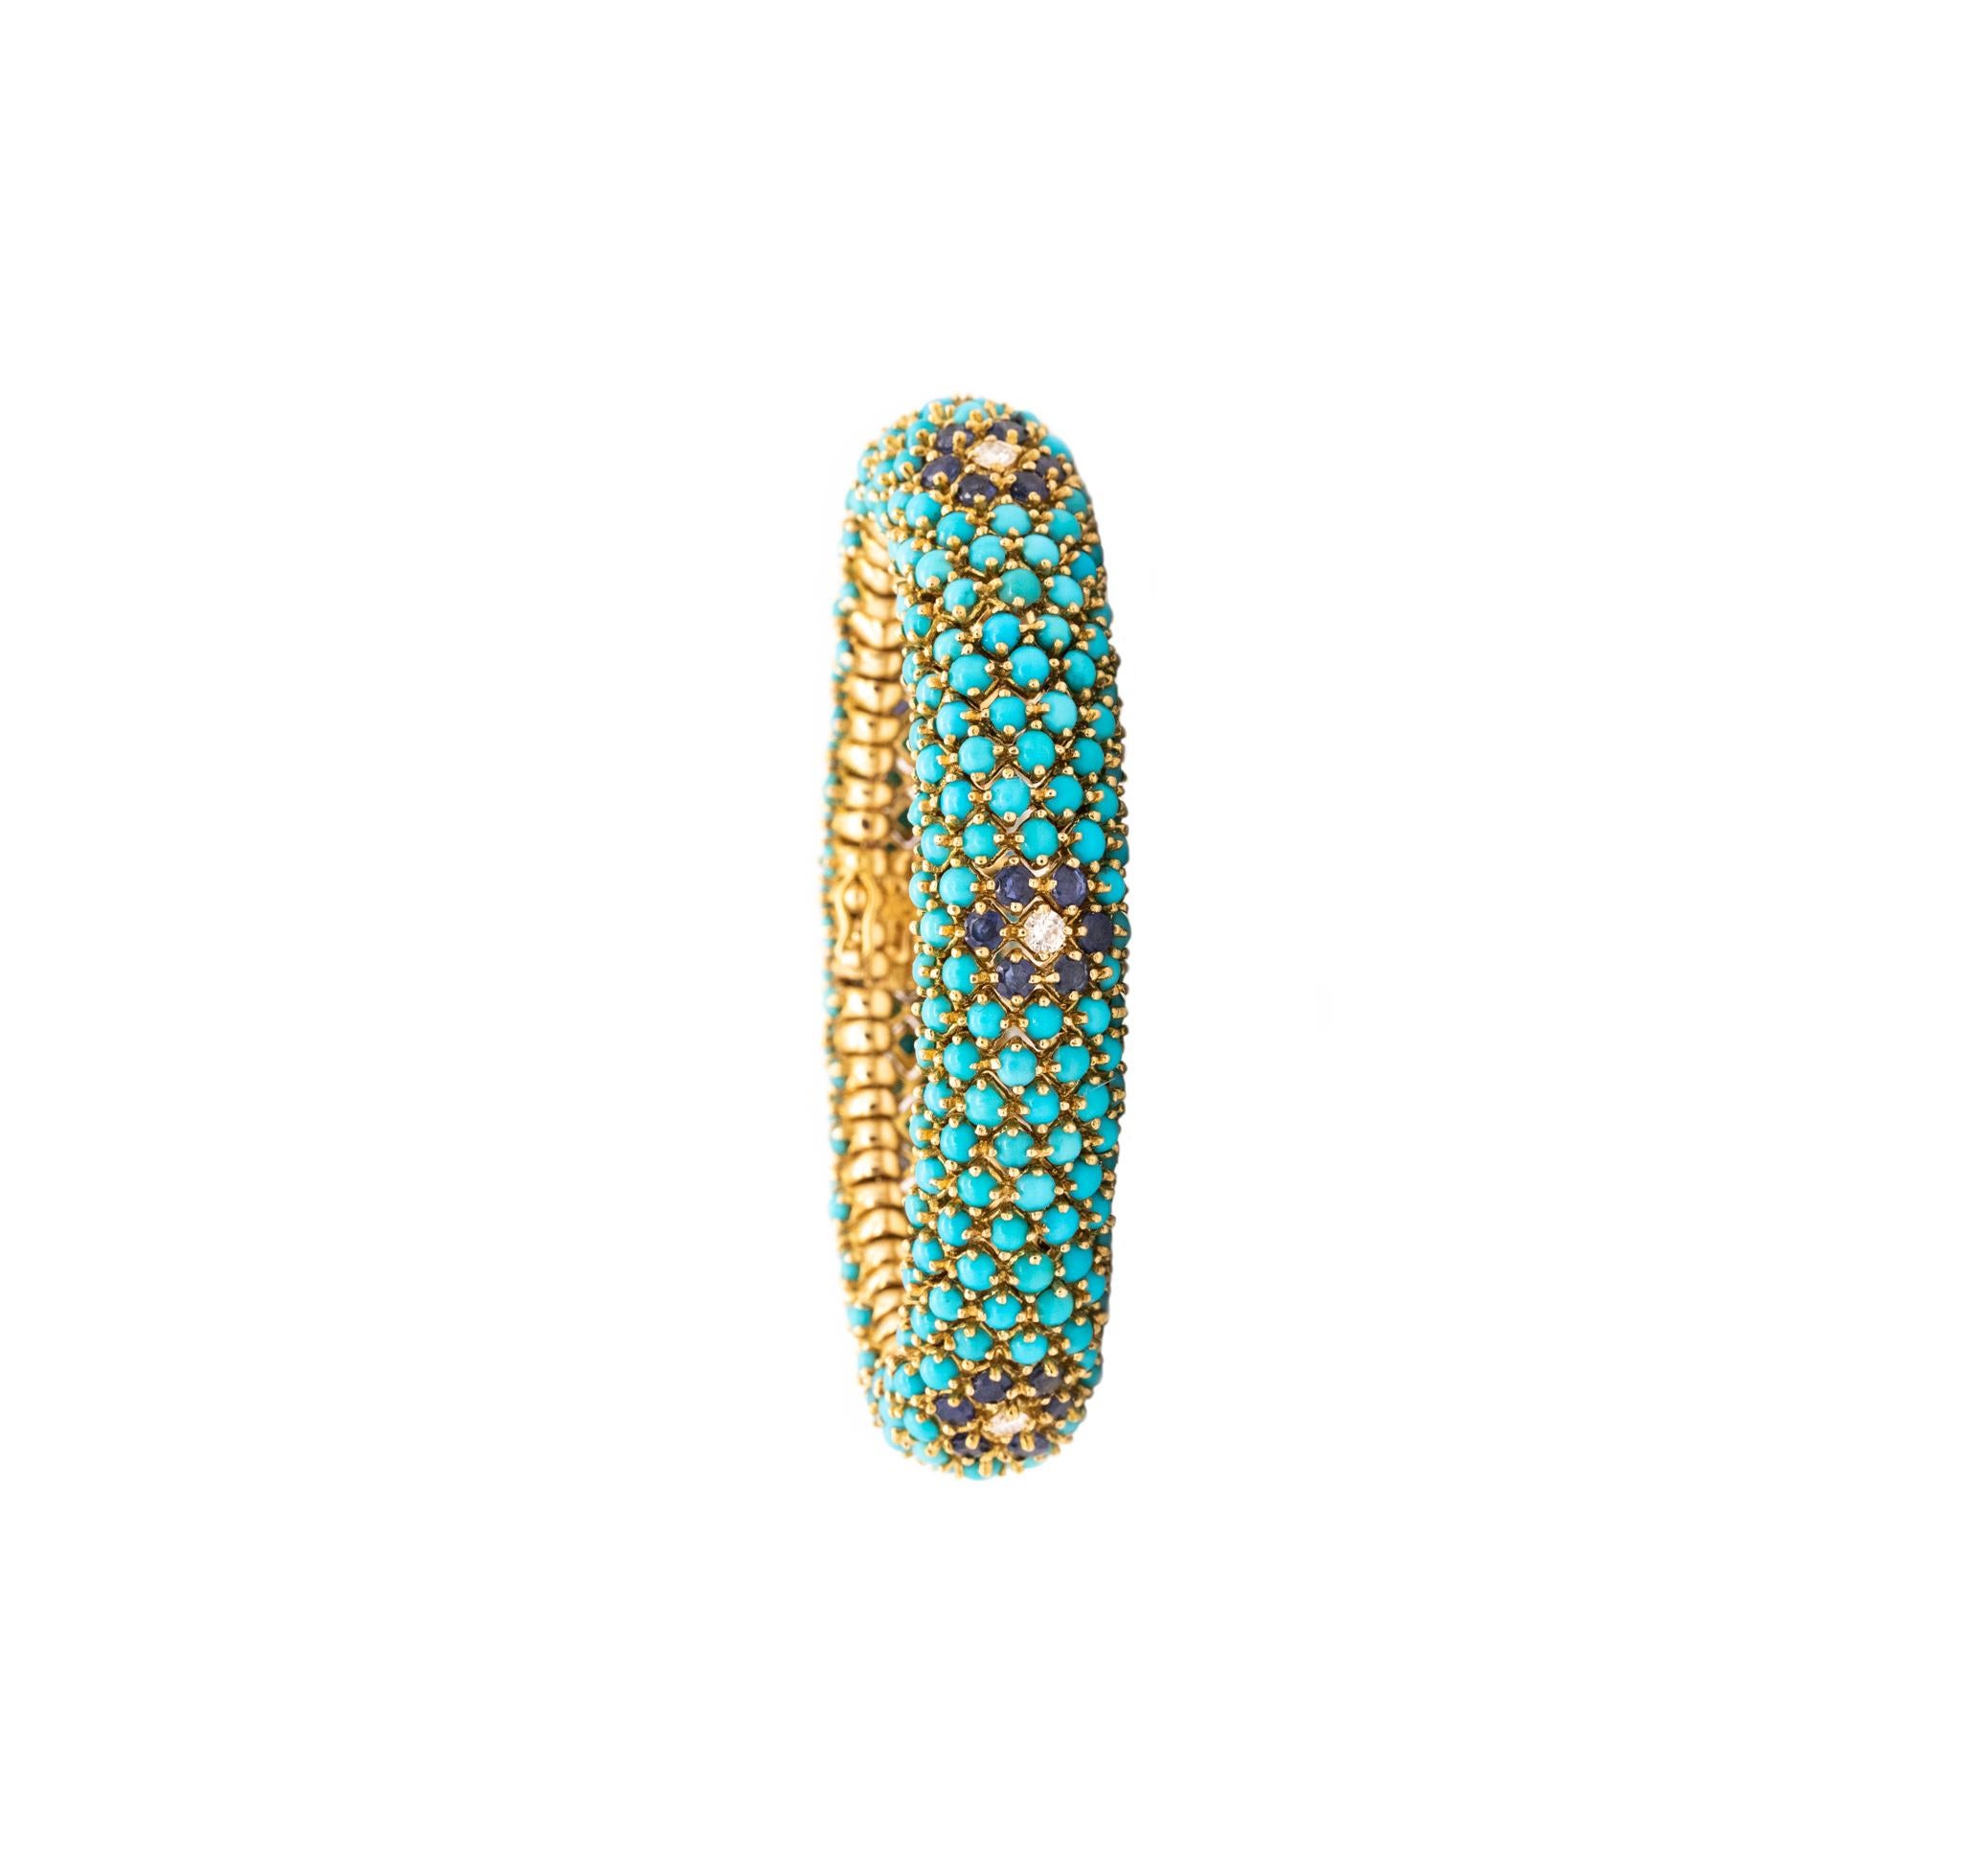 A gemstones bracelet designed by the Hammerman Brothers.

A flexible bracelet from the mid-century period, circa 1960's. It was carefully crafted in solid 18 karats yellow gold and suited with a push boxed lock, with a hinged figure 8 for extra